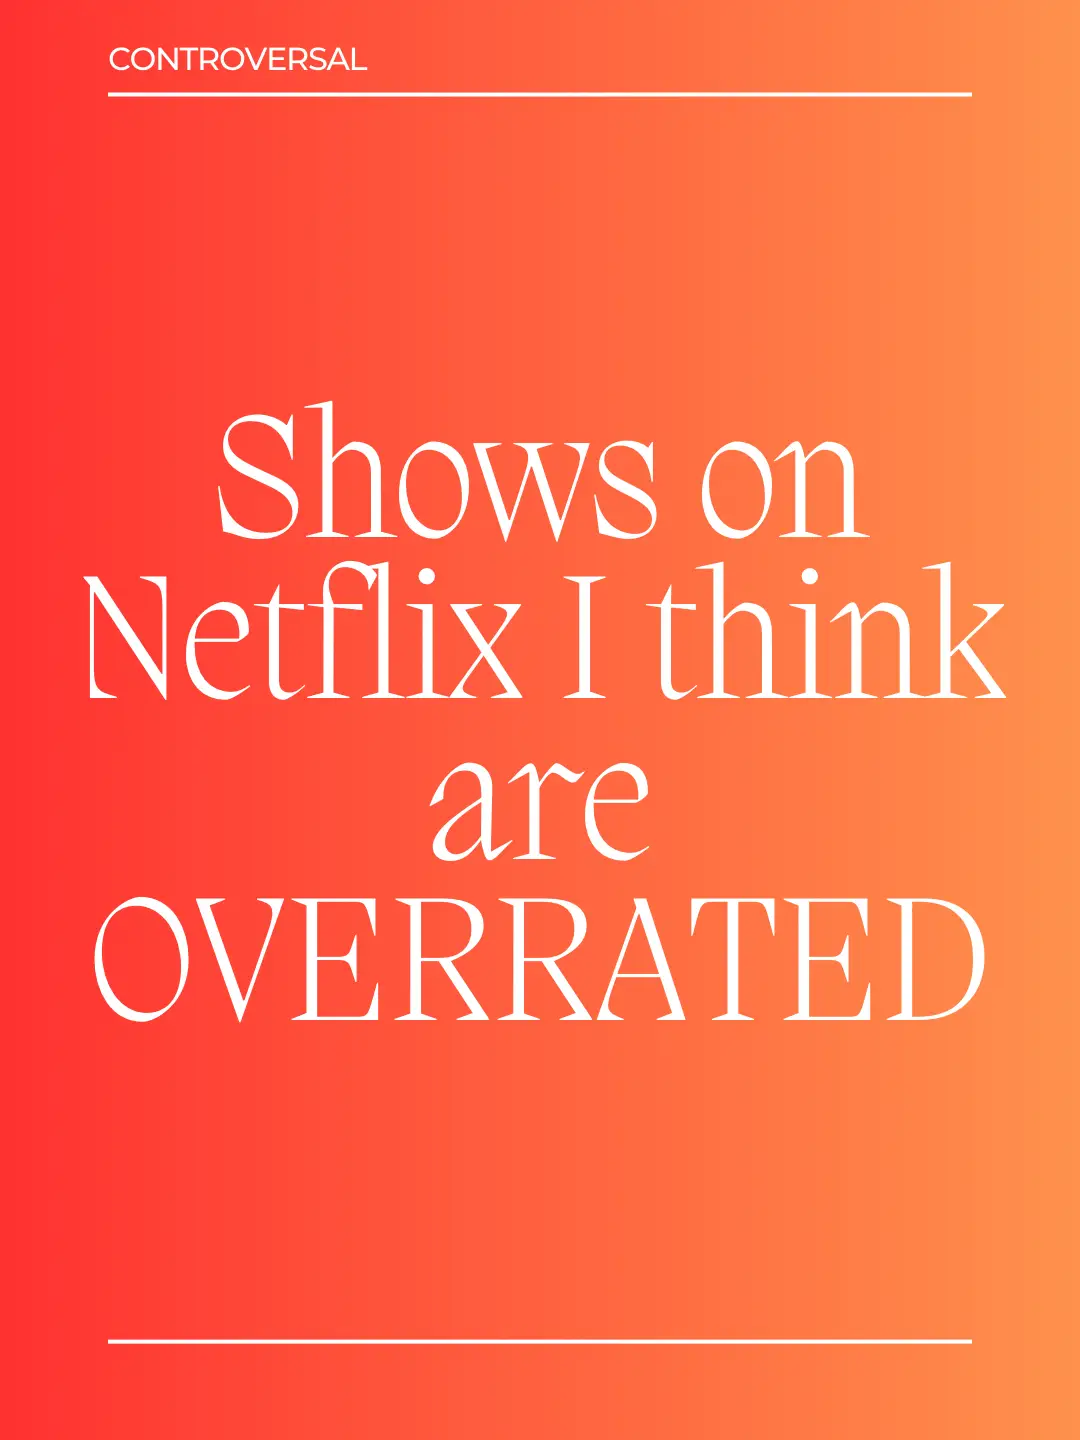 Shoes on Netflix I think are overrated 's images